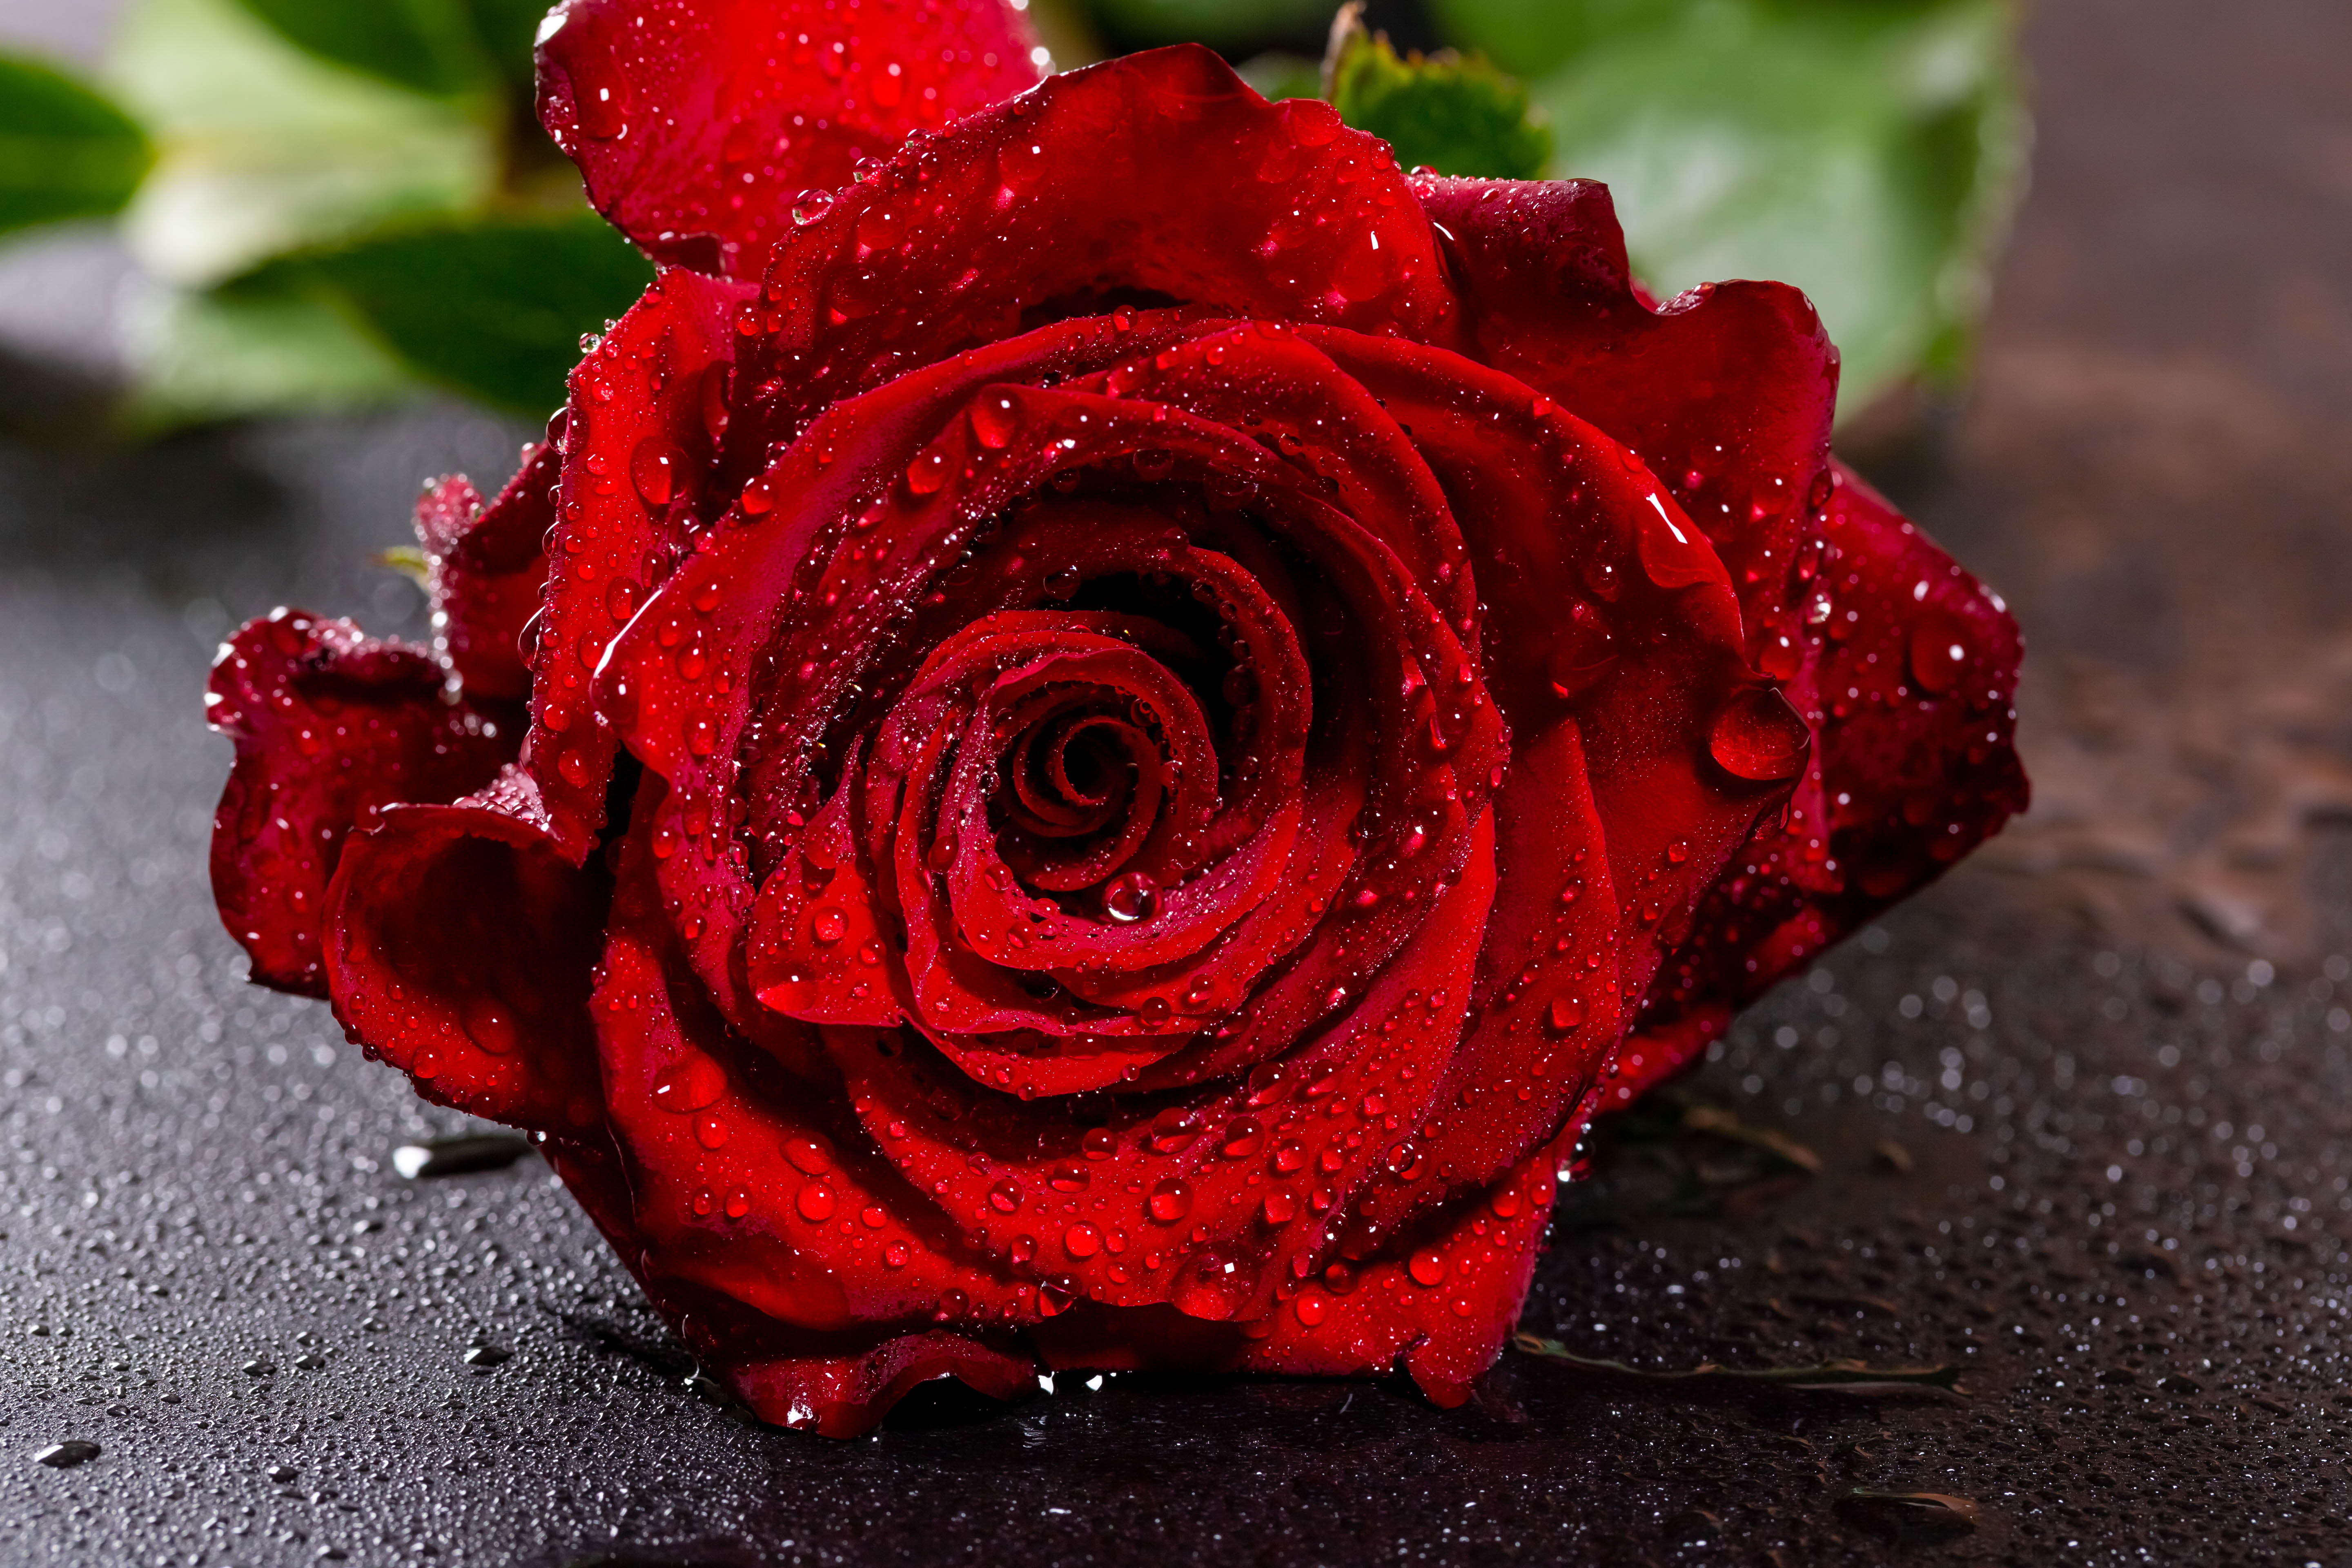 137496 download wallpaper flowers, drops, red, rose flower, rose, petals, wet screensavers and pictures for free